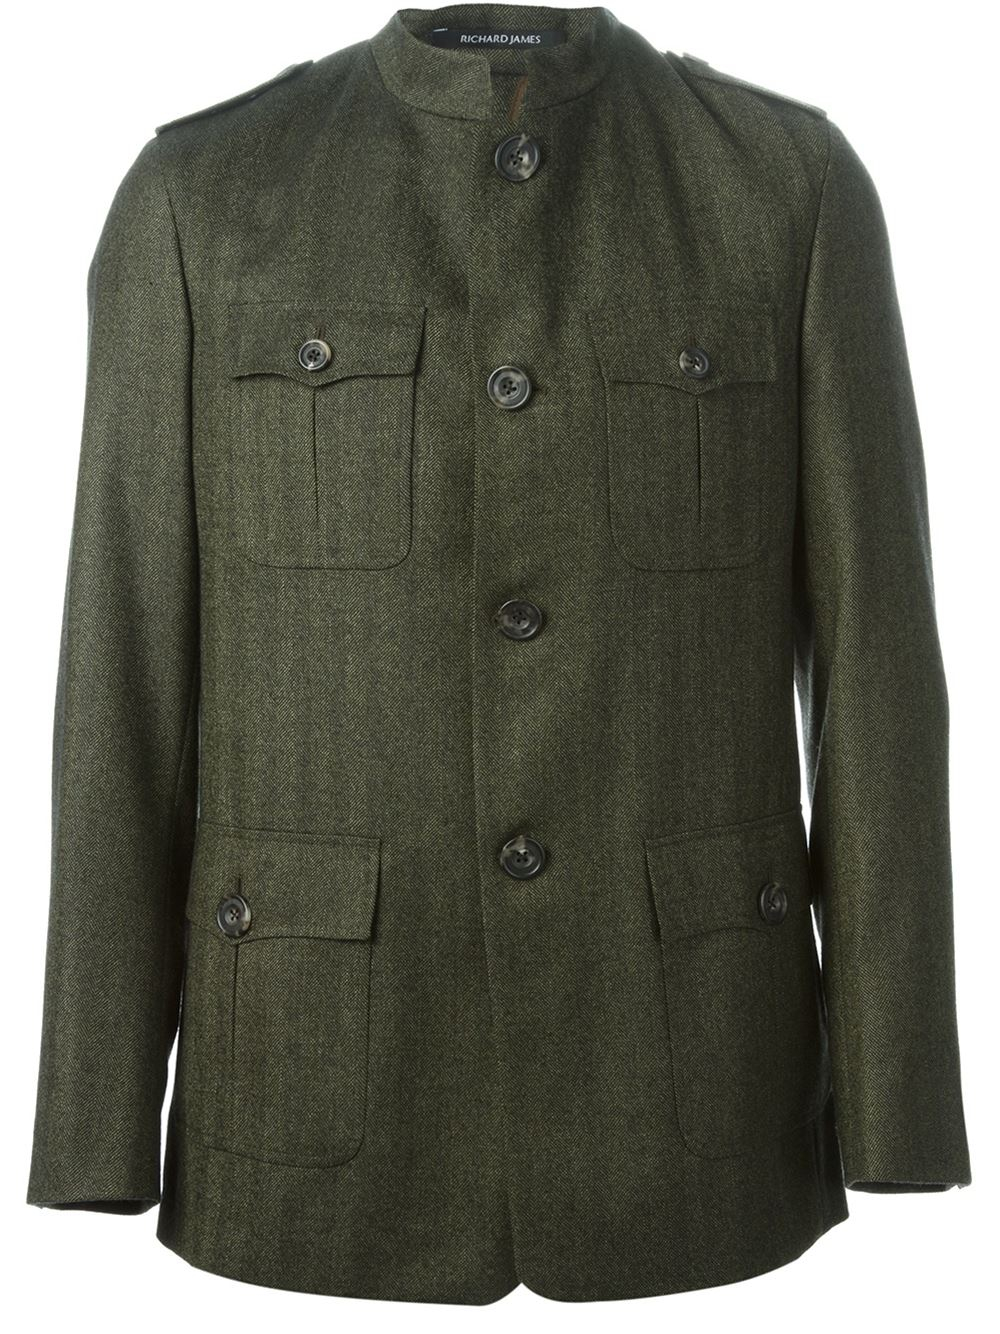 Lyst - Richard James Four Inverted Pleat Pockets Jacket in Green for Men